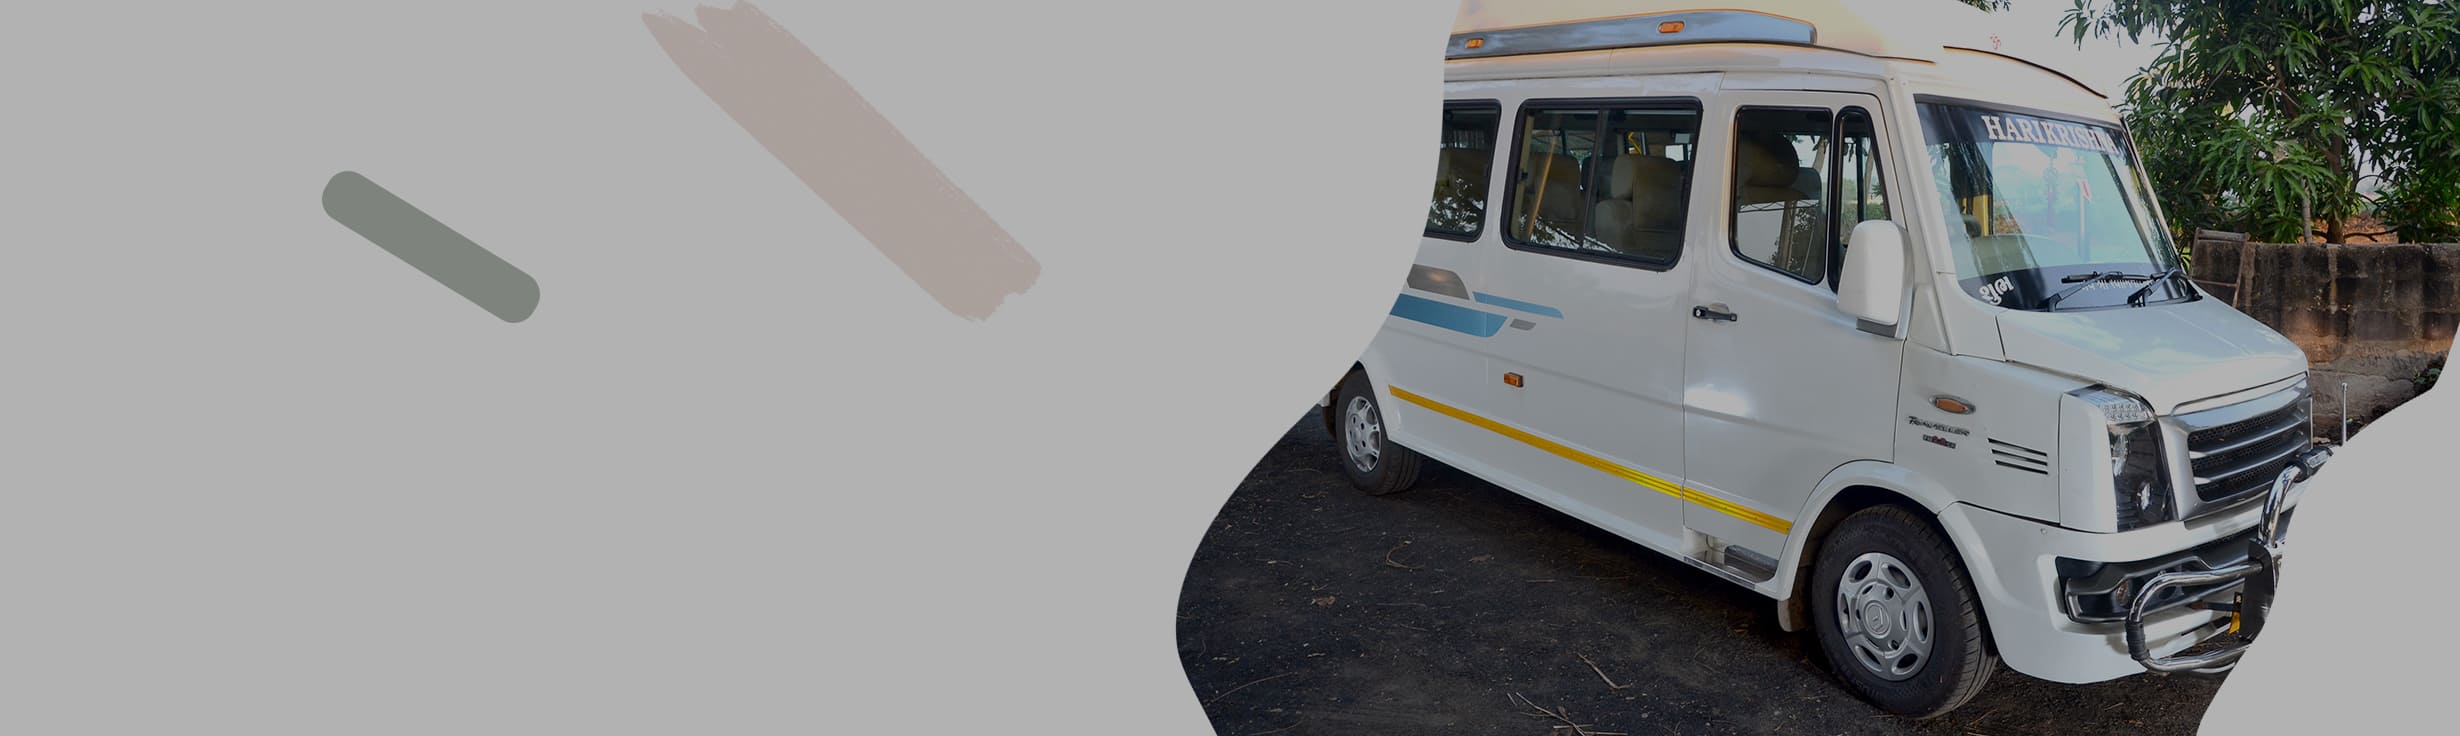 12 Seater tempo Traveller Hire